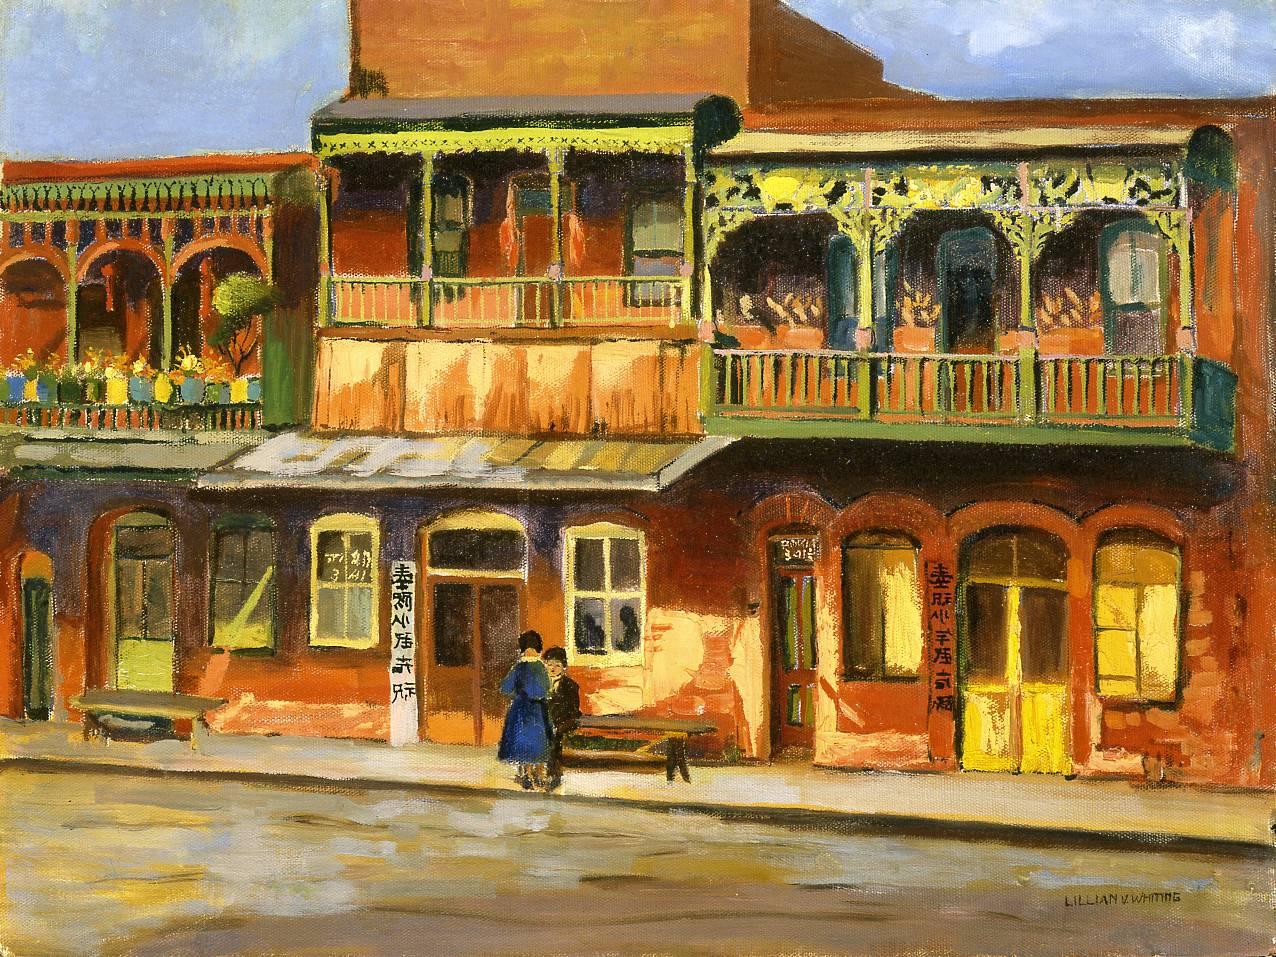 Lillian Whiting Landscape Painting - Chinatown, Los Angeles